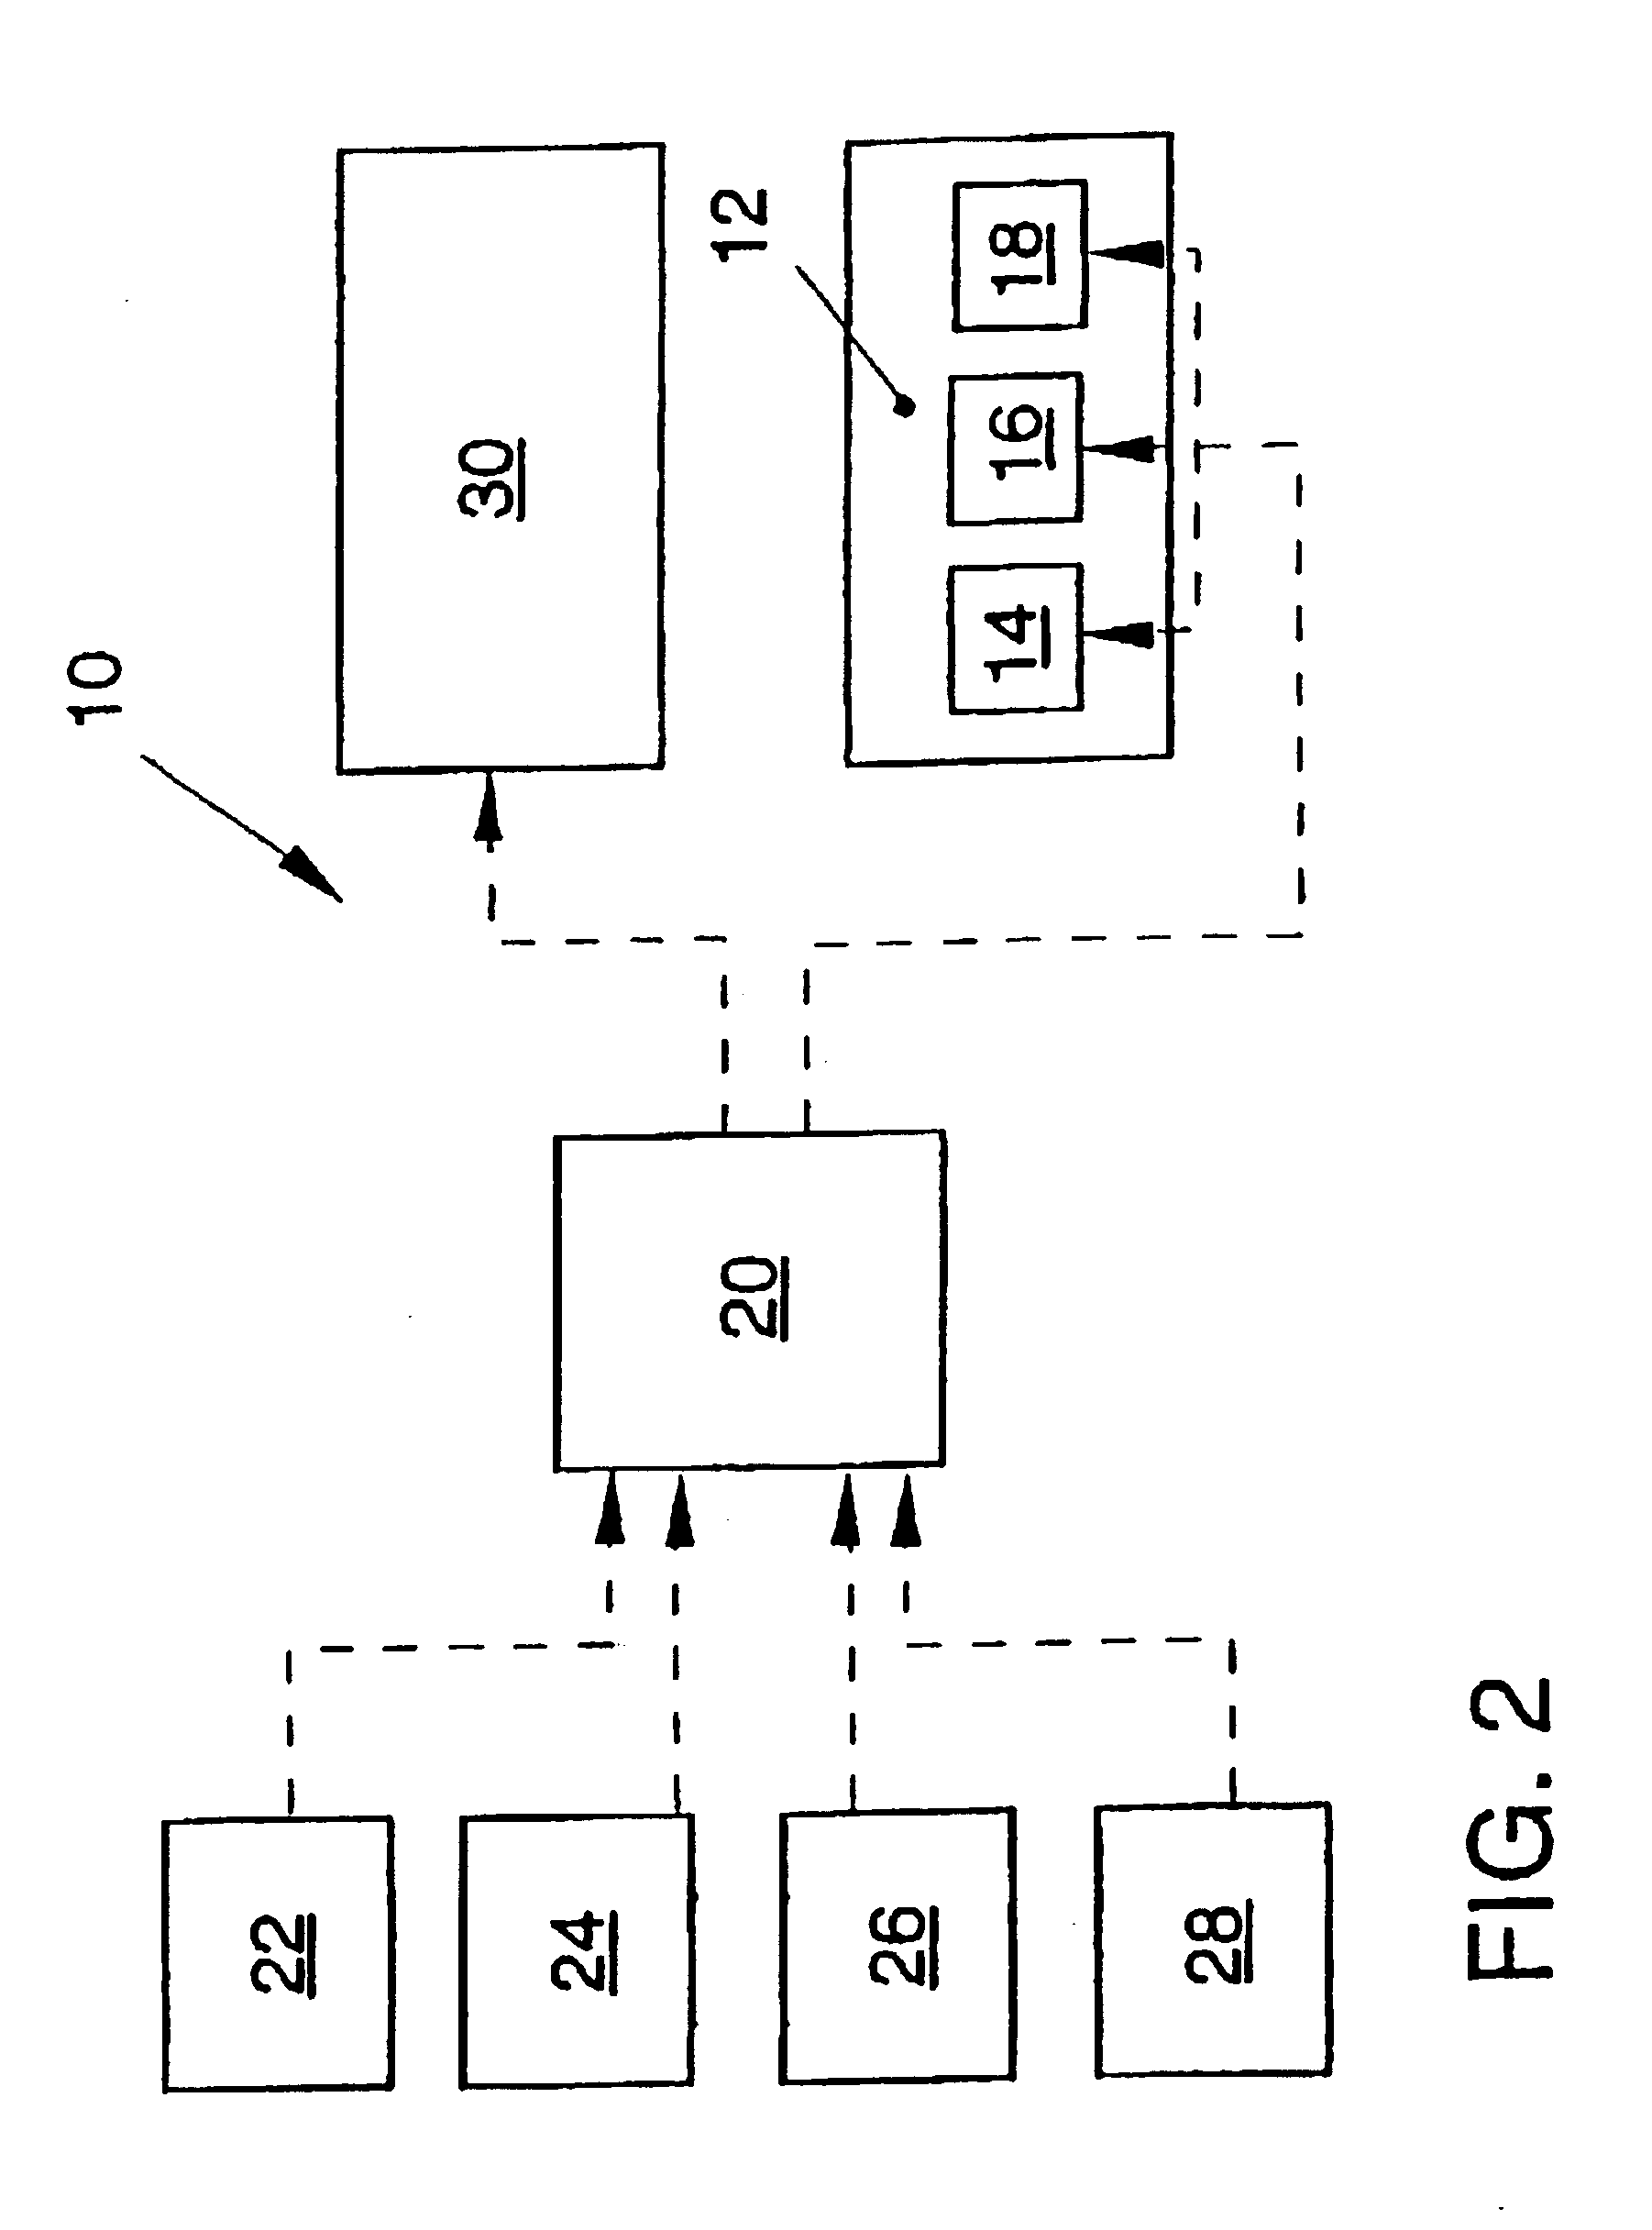 Interior lighting system of a motor vehicle and a method for controlling the same